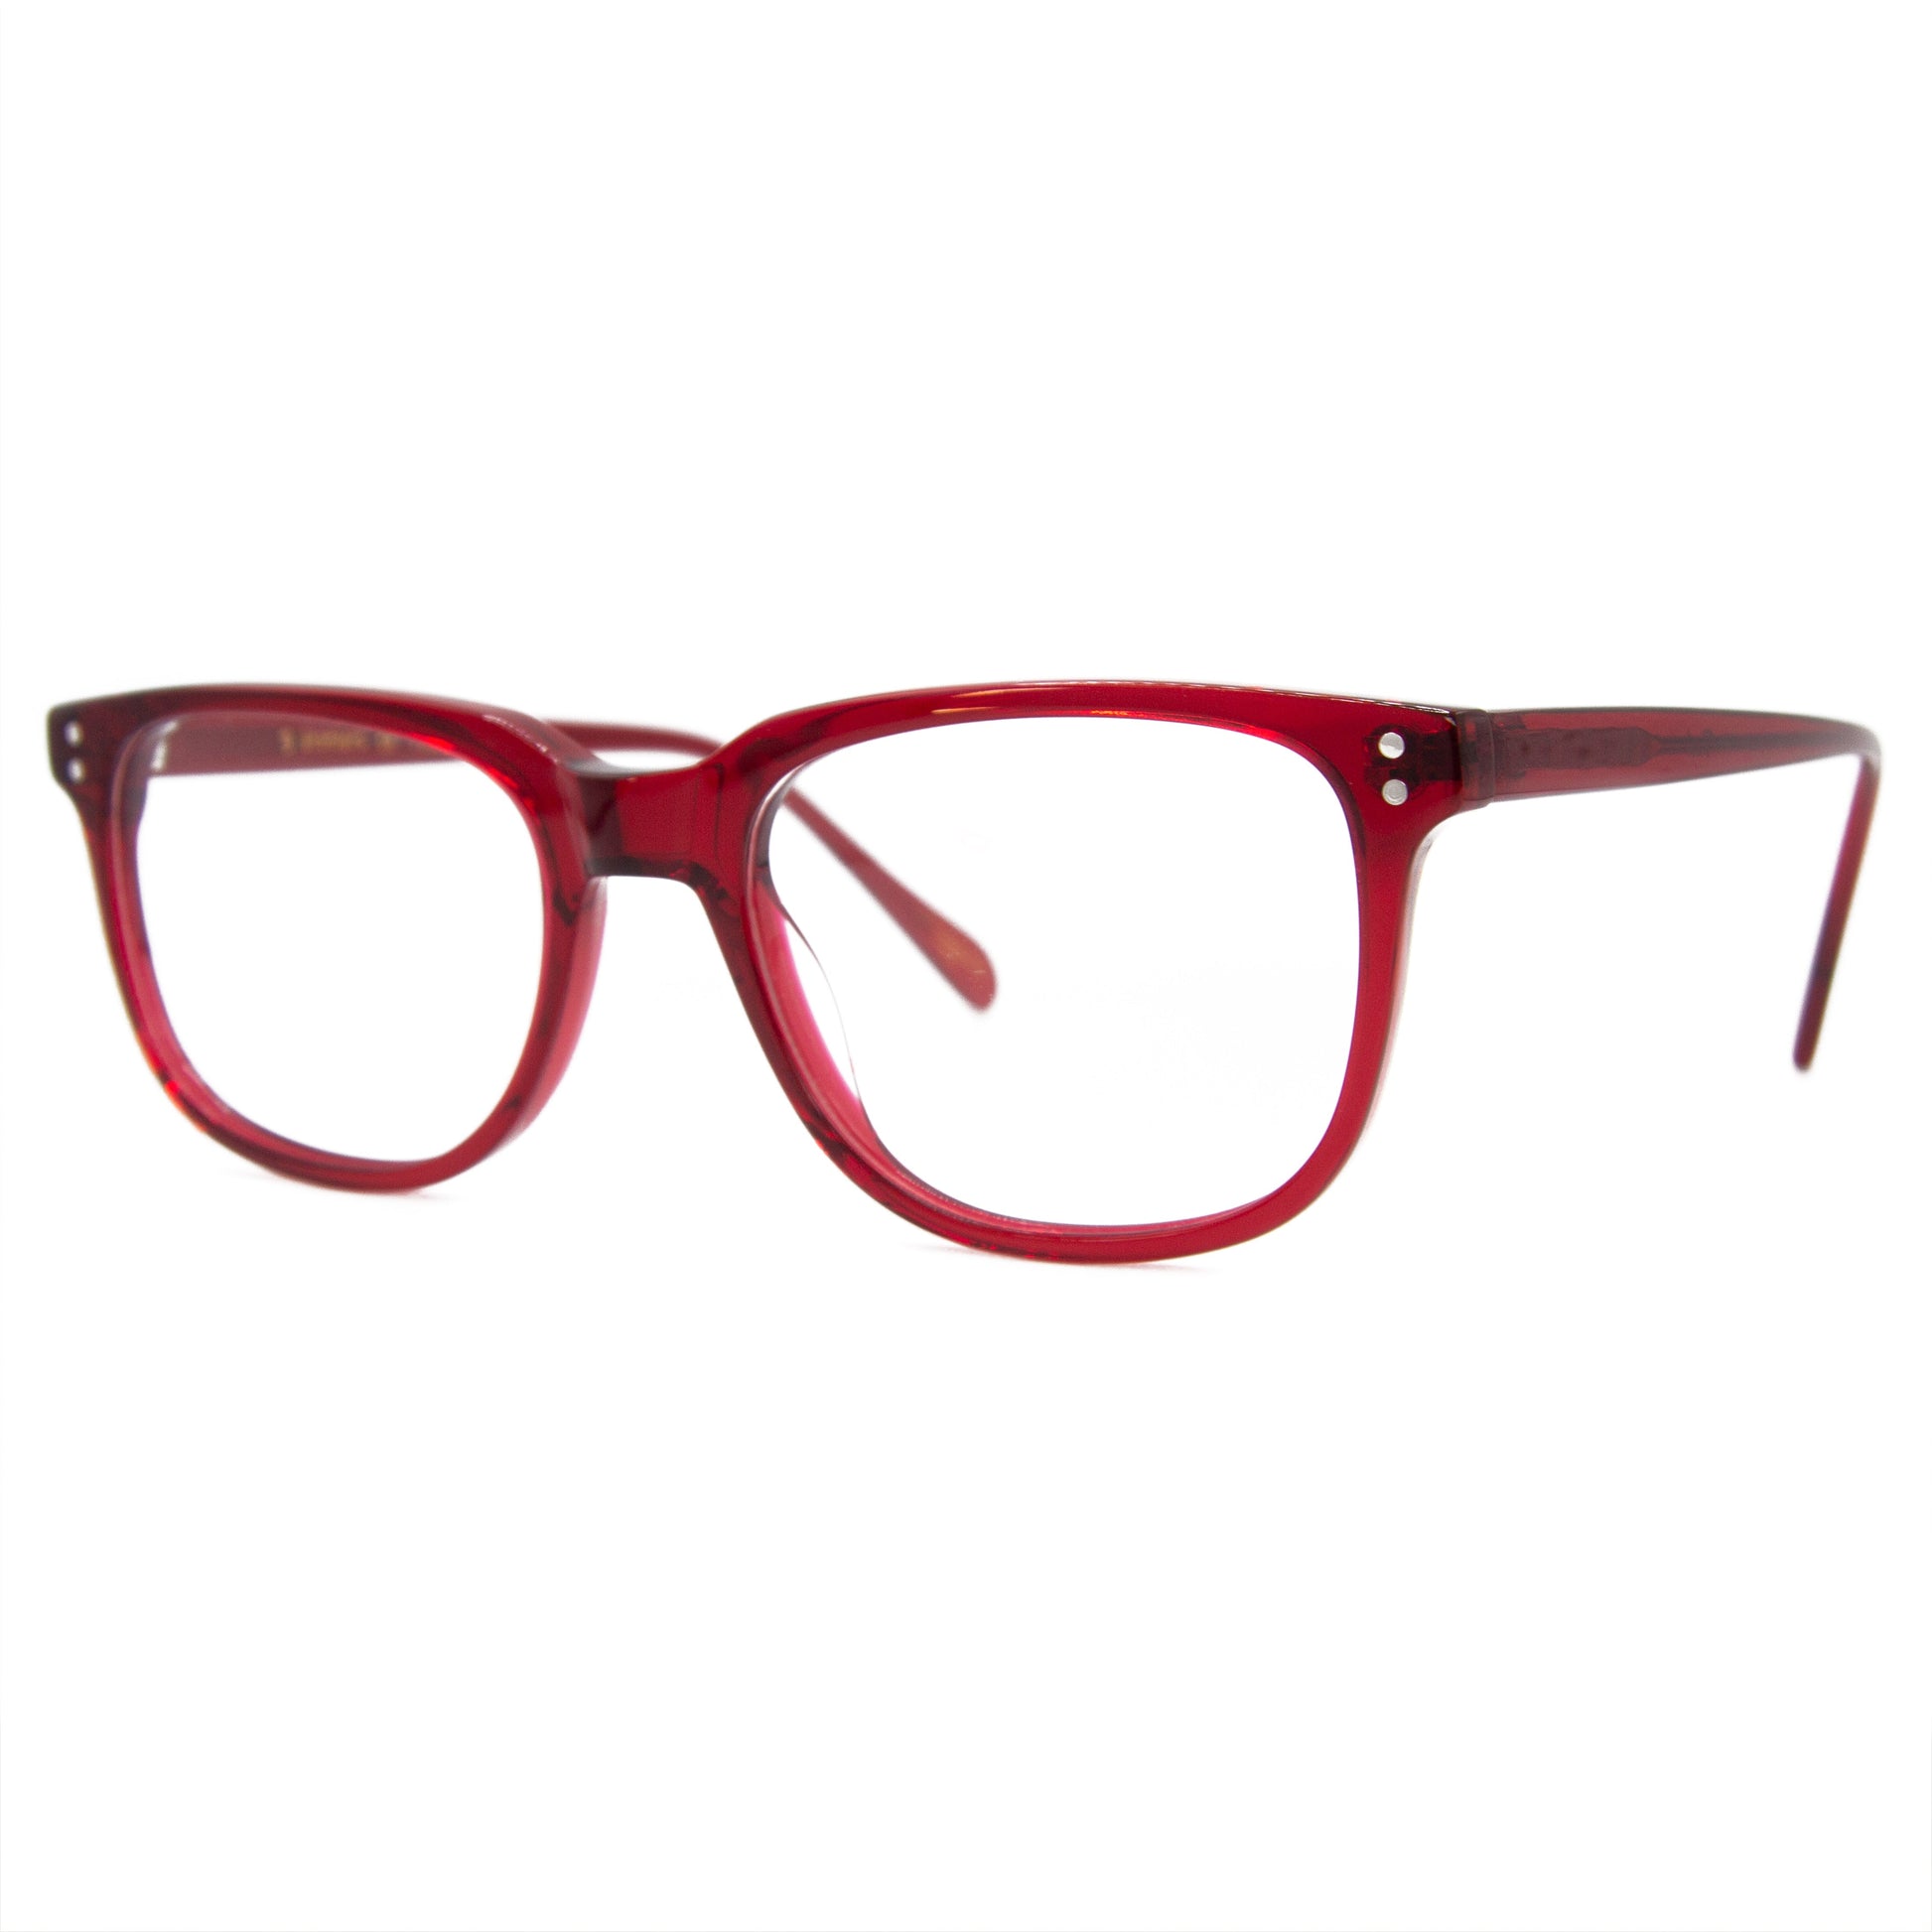 3 brothers - Theo - Red - Prescription Glasses - Side